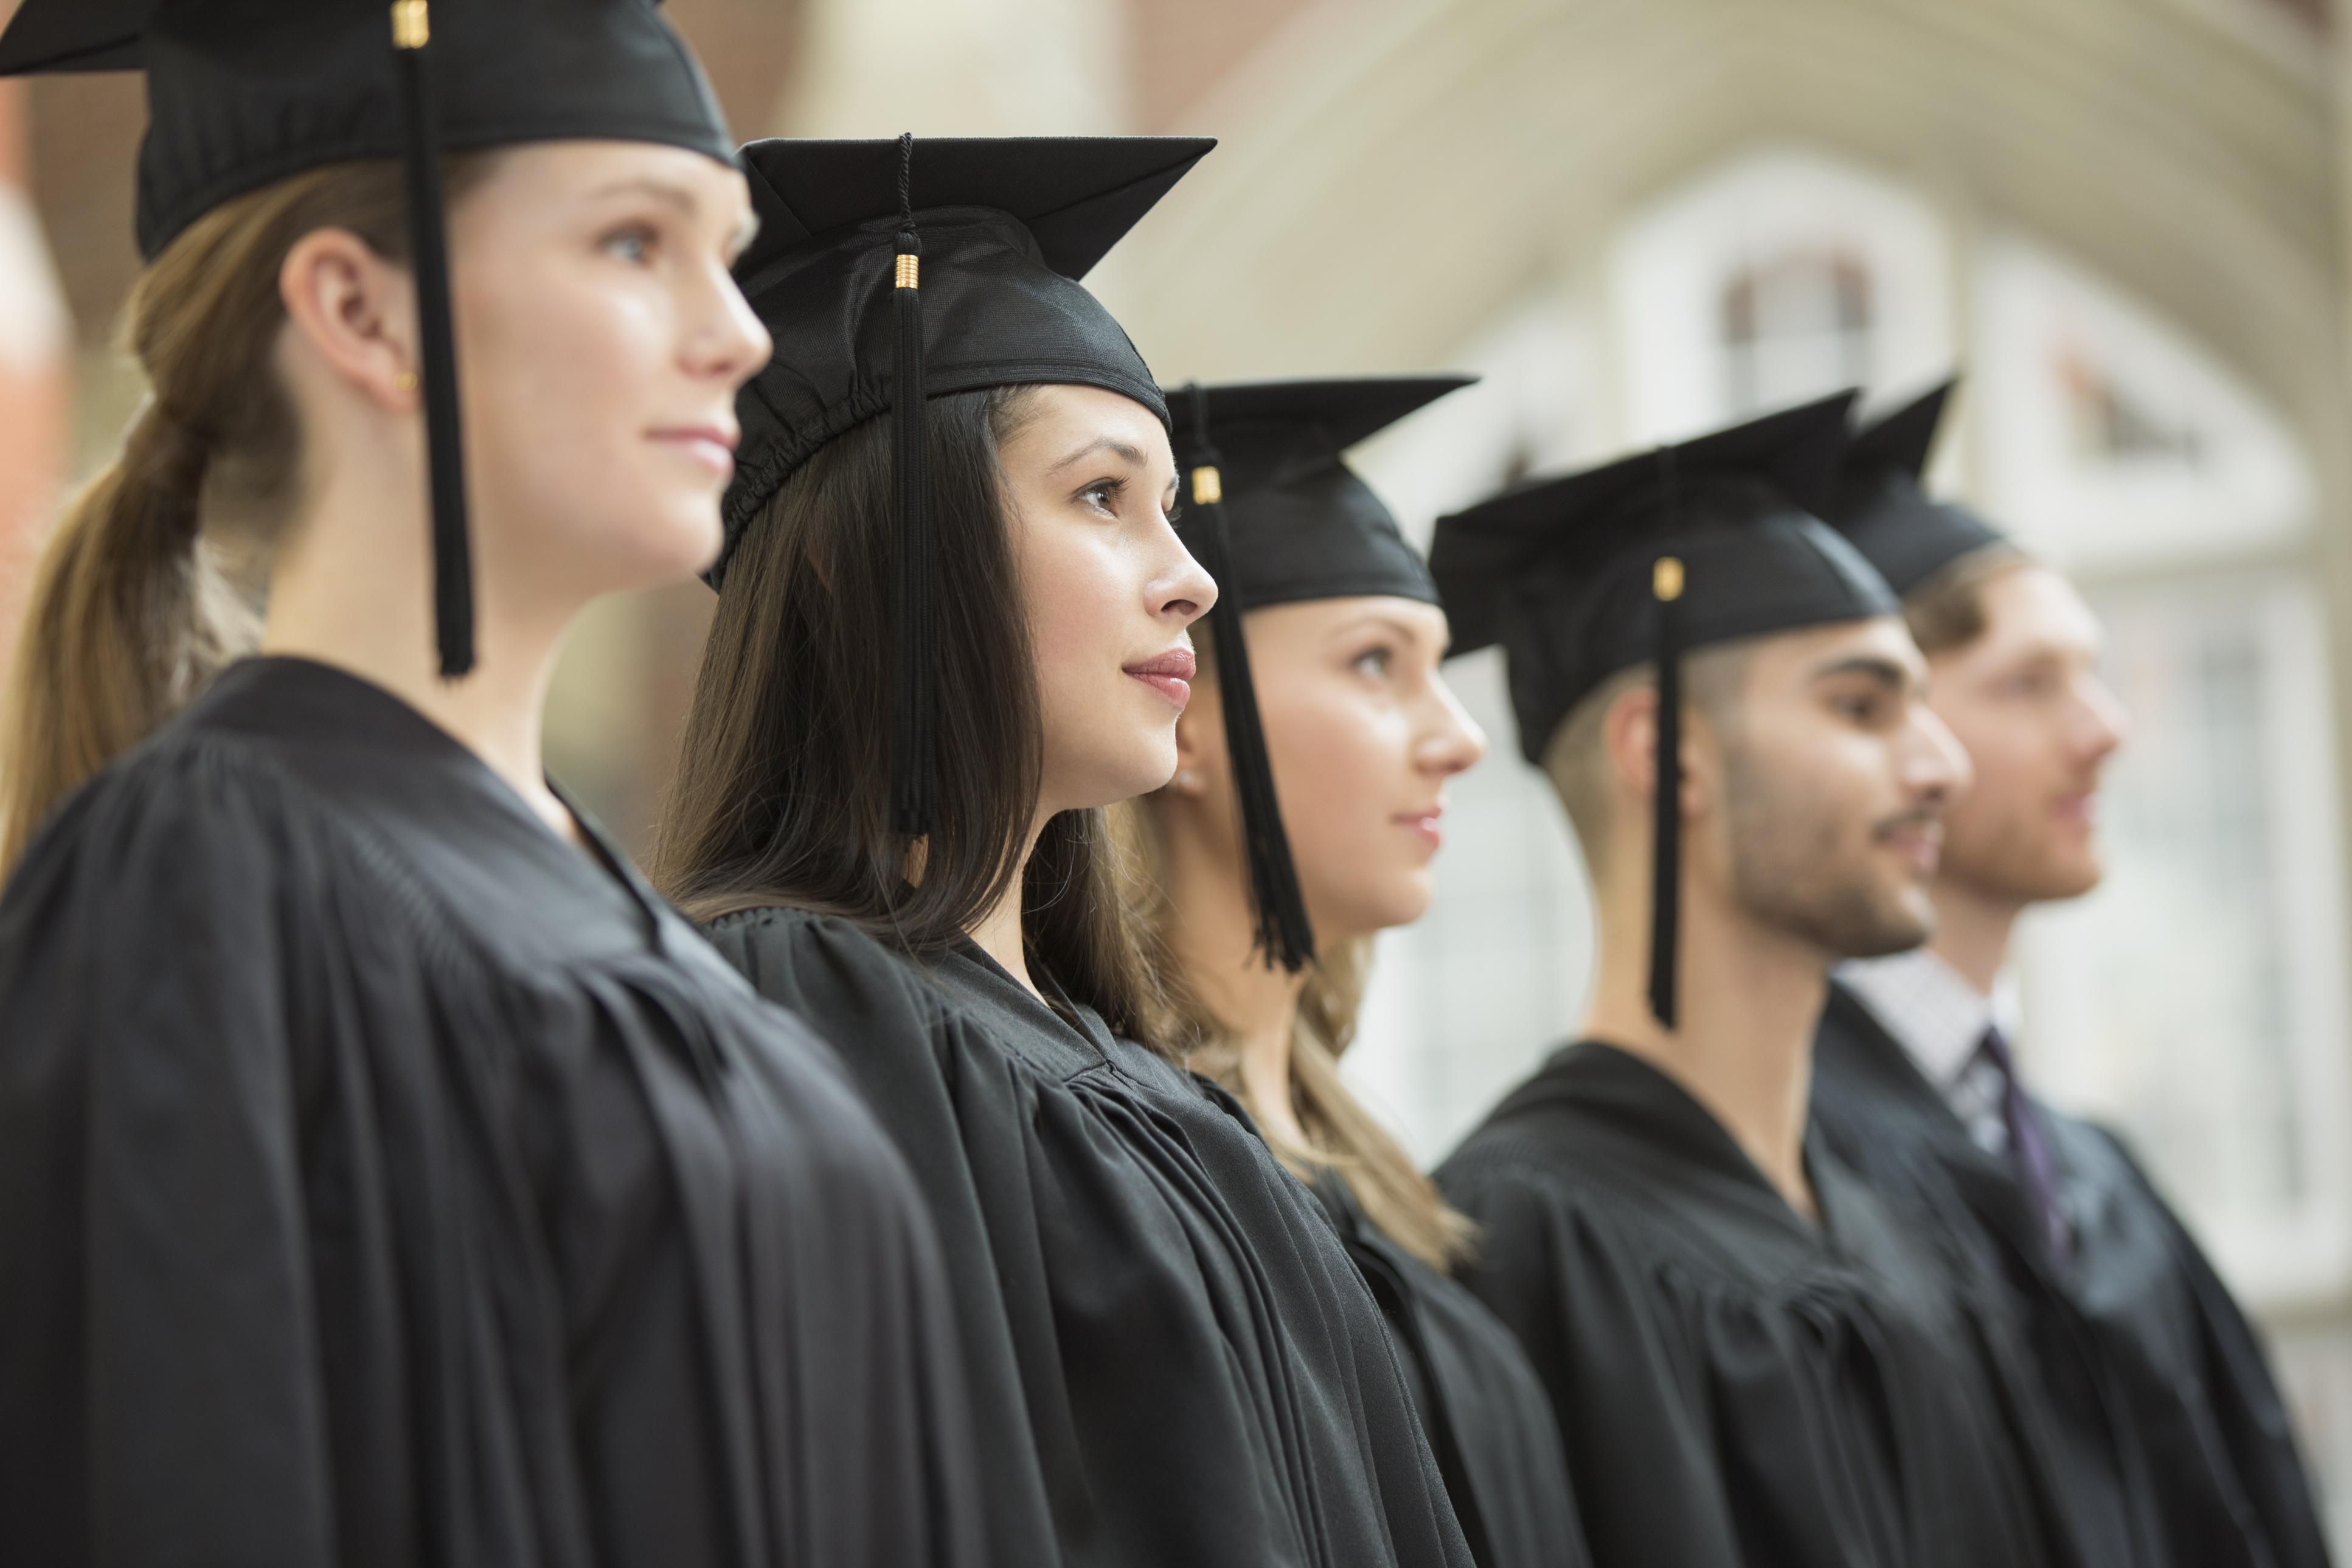 What Is a Baccalaureate Ceremony?